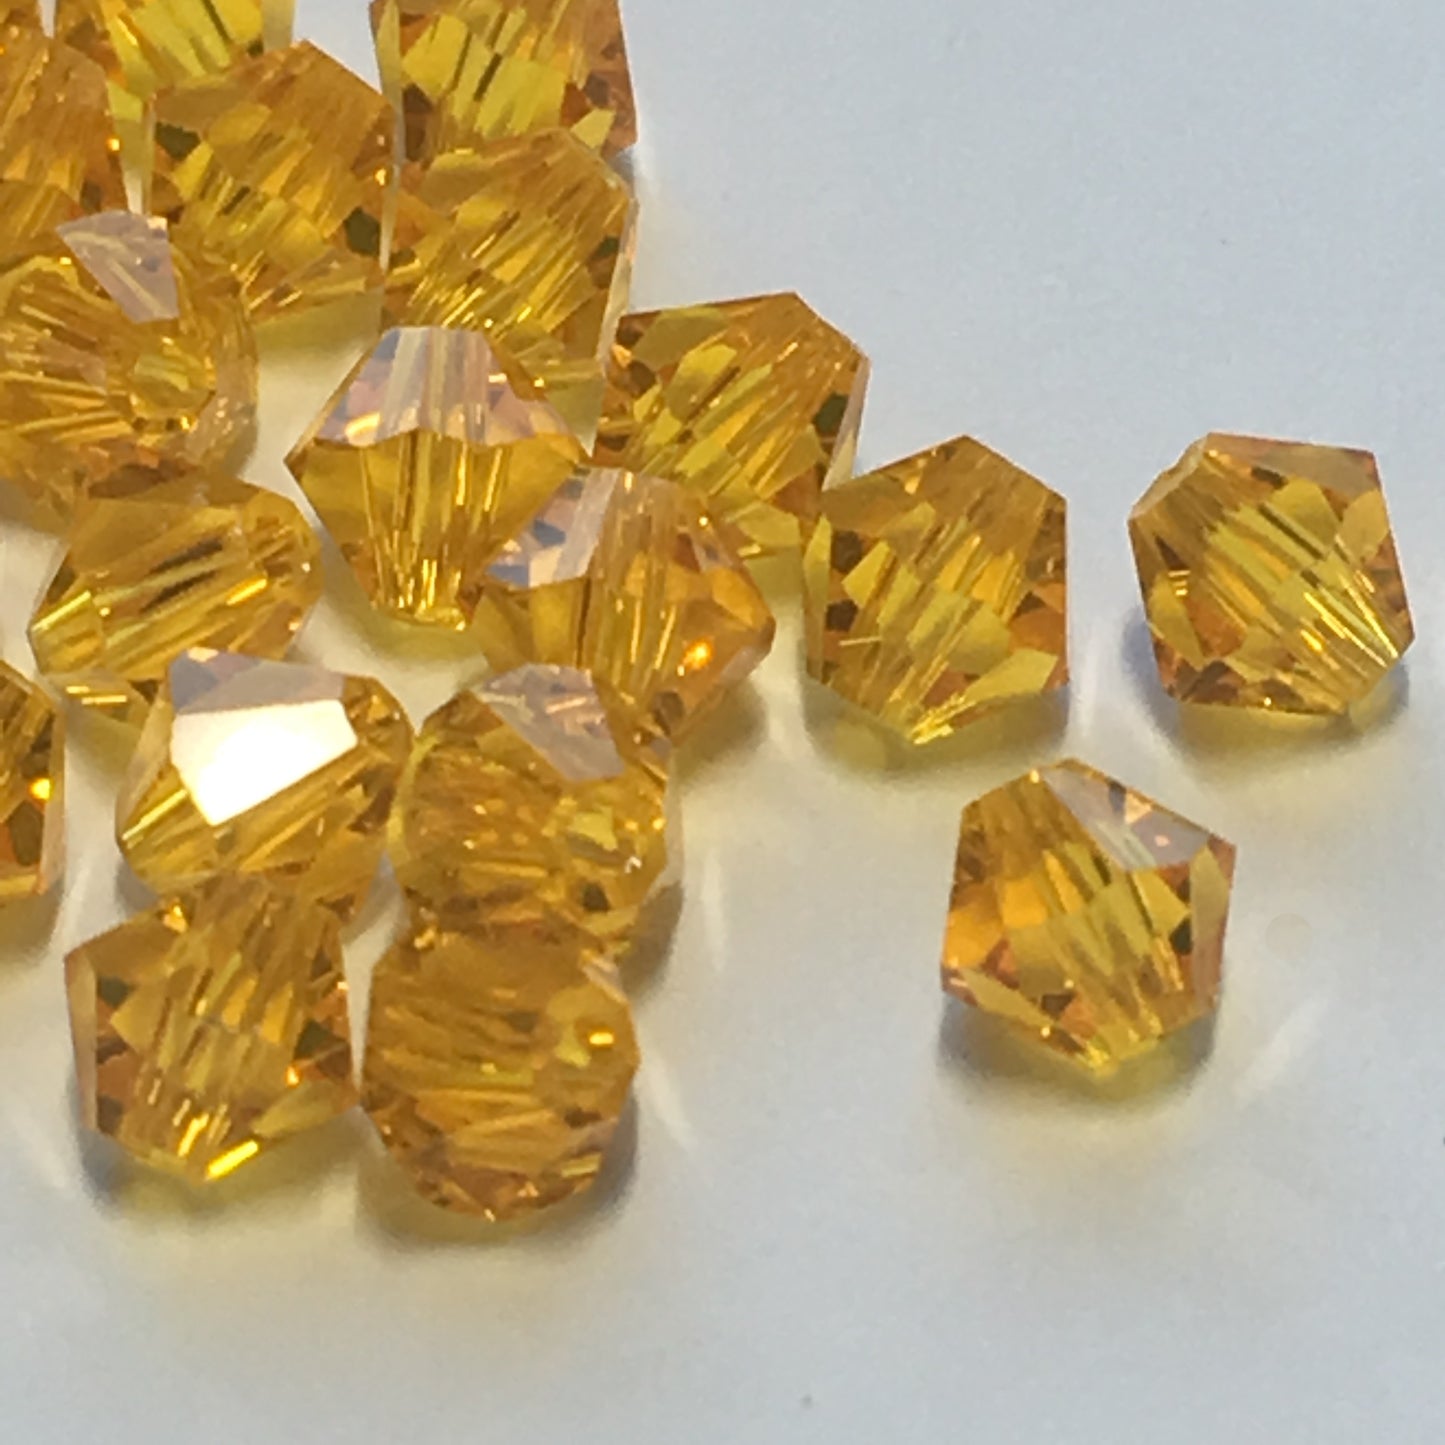 Swarovski Topaz Faceted Bicone Crystal Beads, 4 mm - 33 Beads